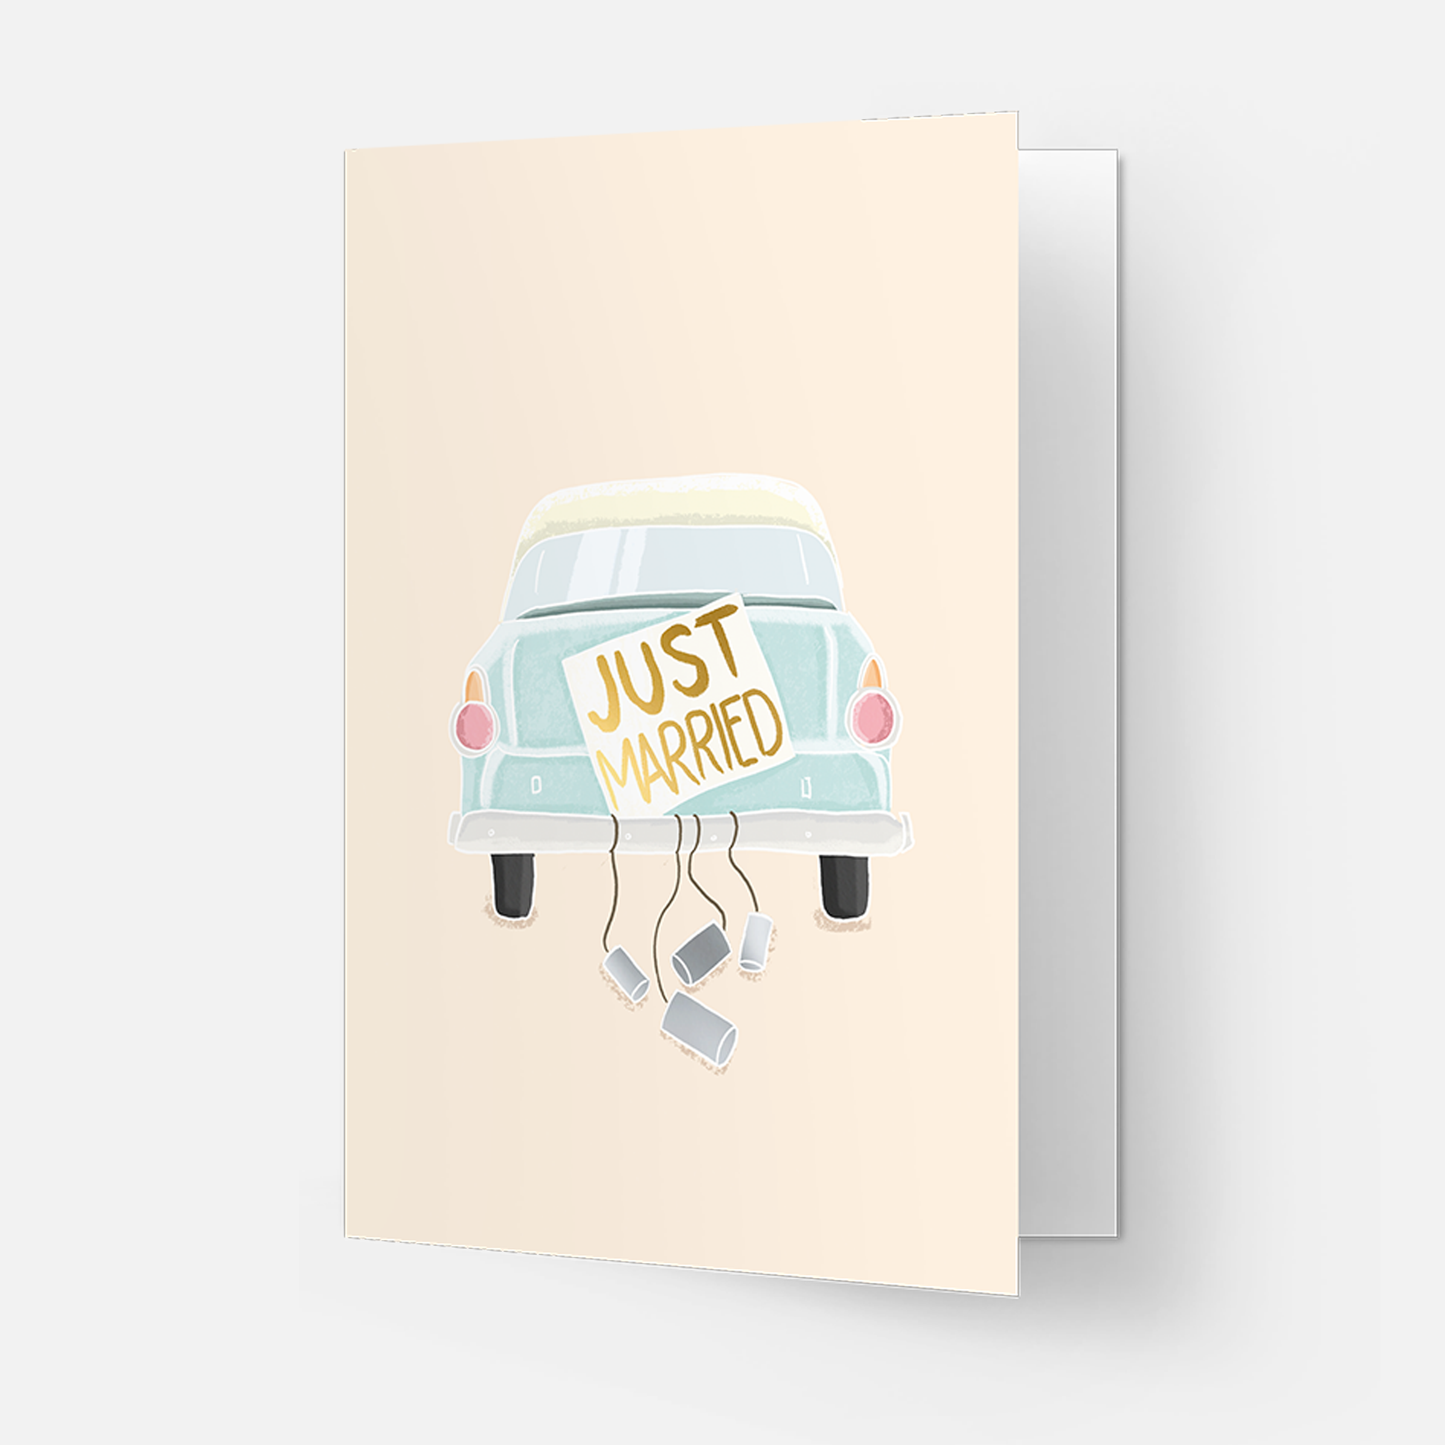 Just Married greeting card